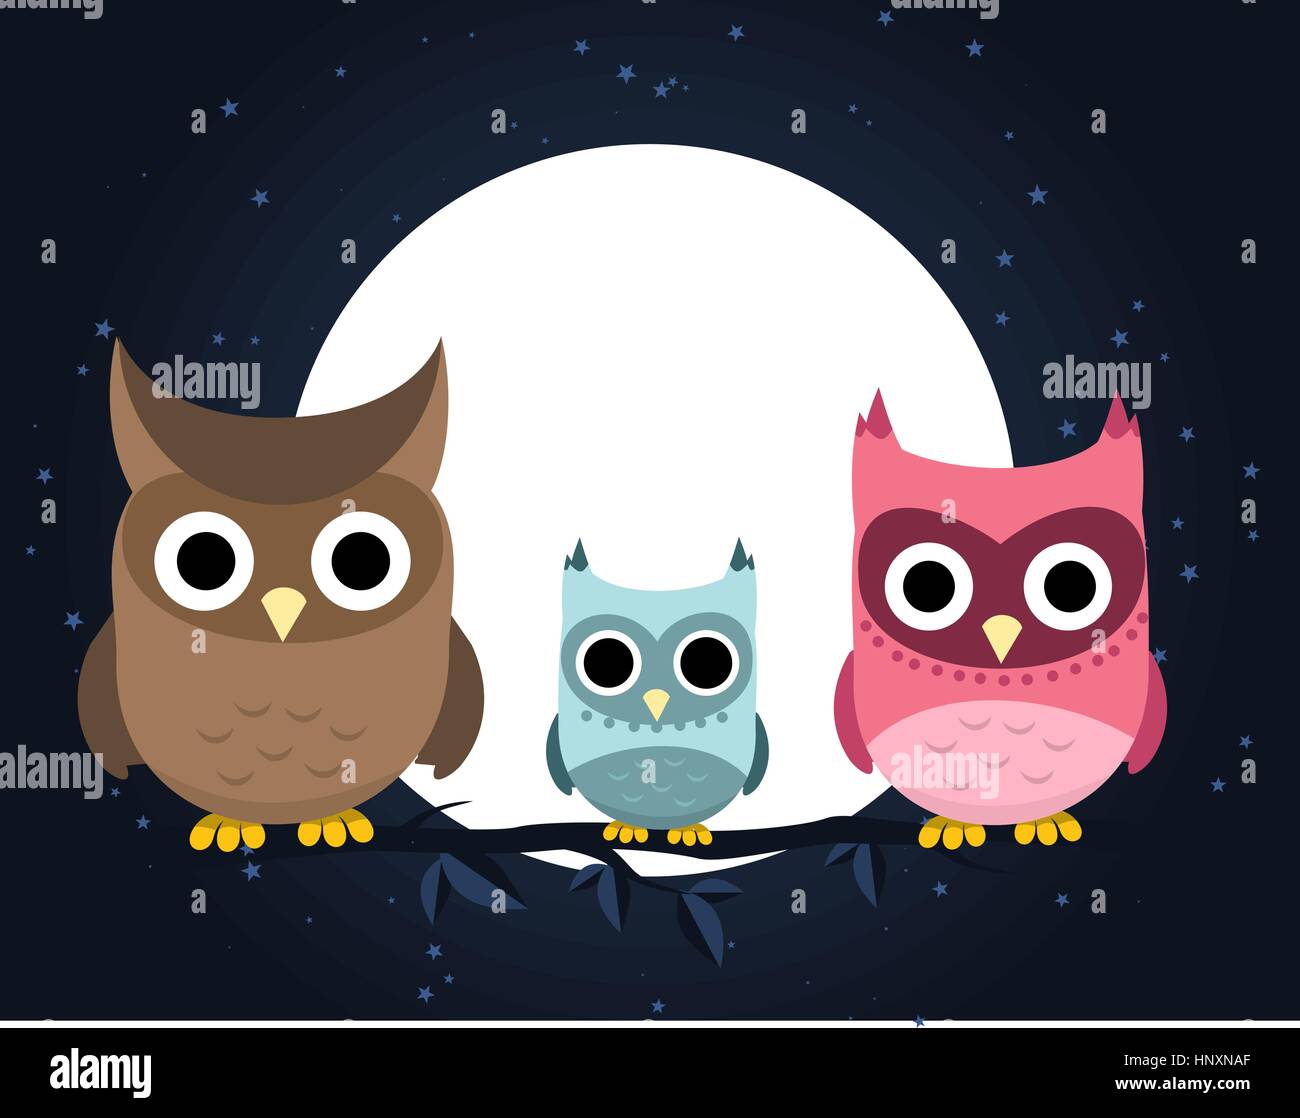 Owl family perching at night, with brown owl, light blue owl and pink owl vector illustration. Stock Vector